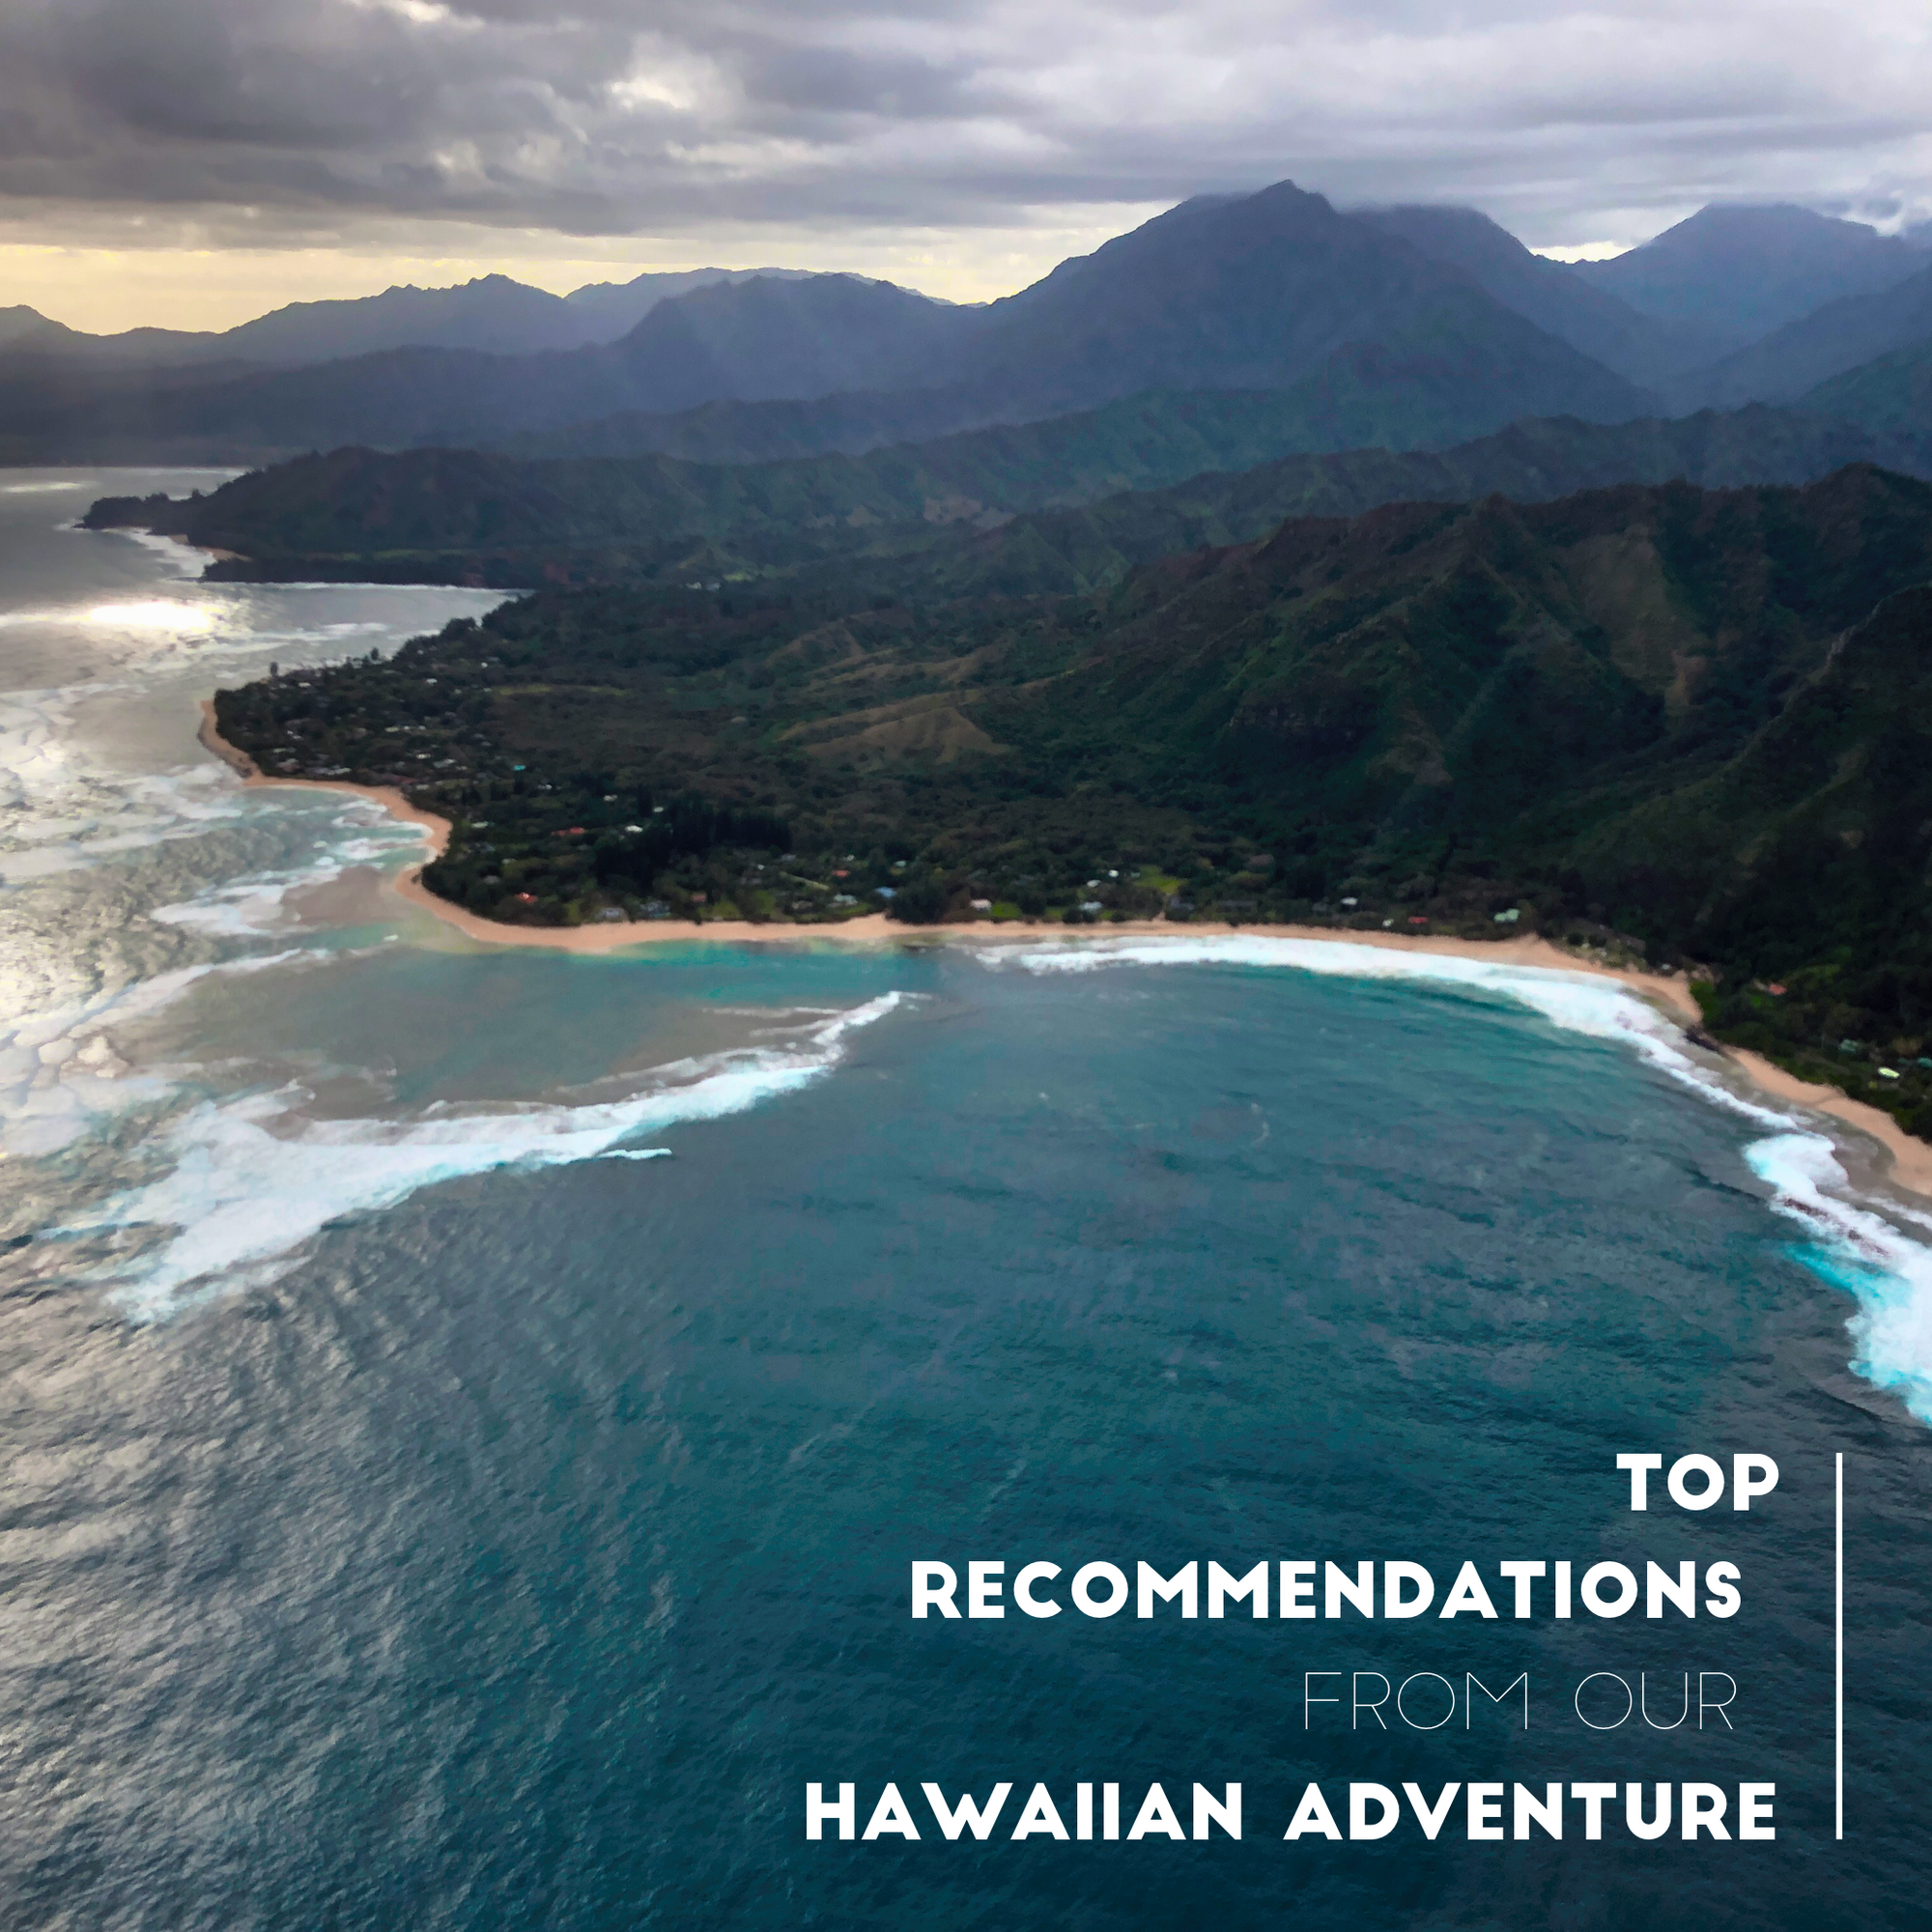 Our Top Hawaii Recommendations